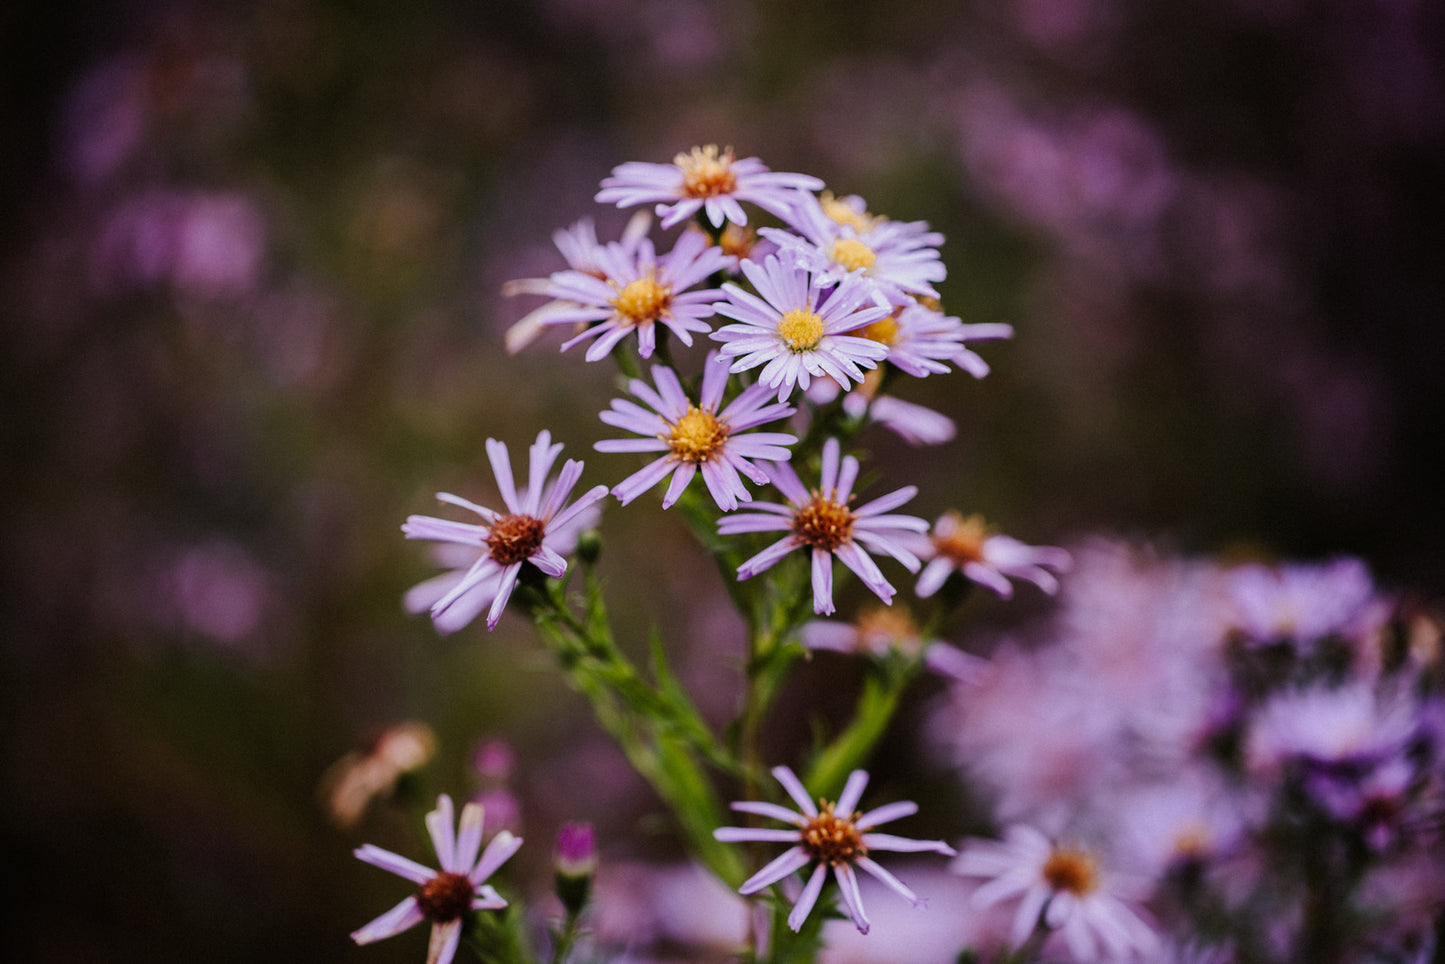 ASTER CORDIFOLIUS / HEART-LEAVED ASTER